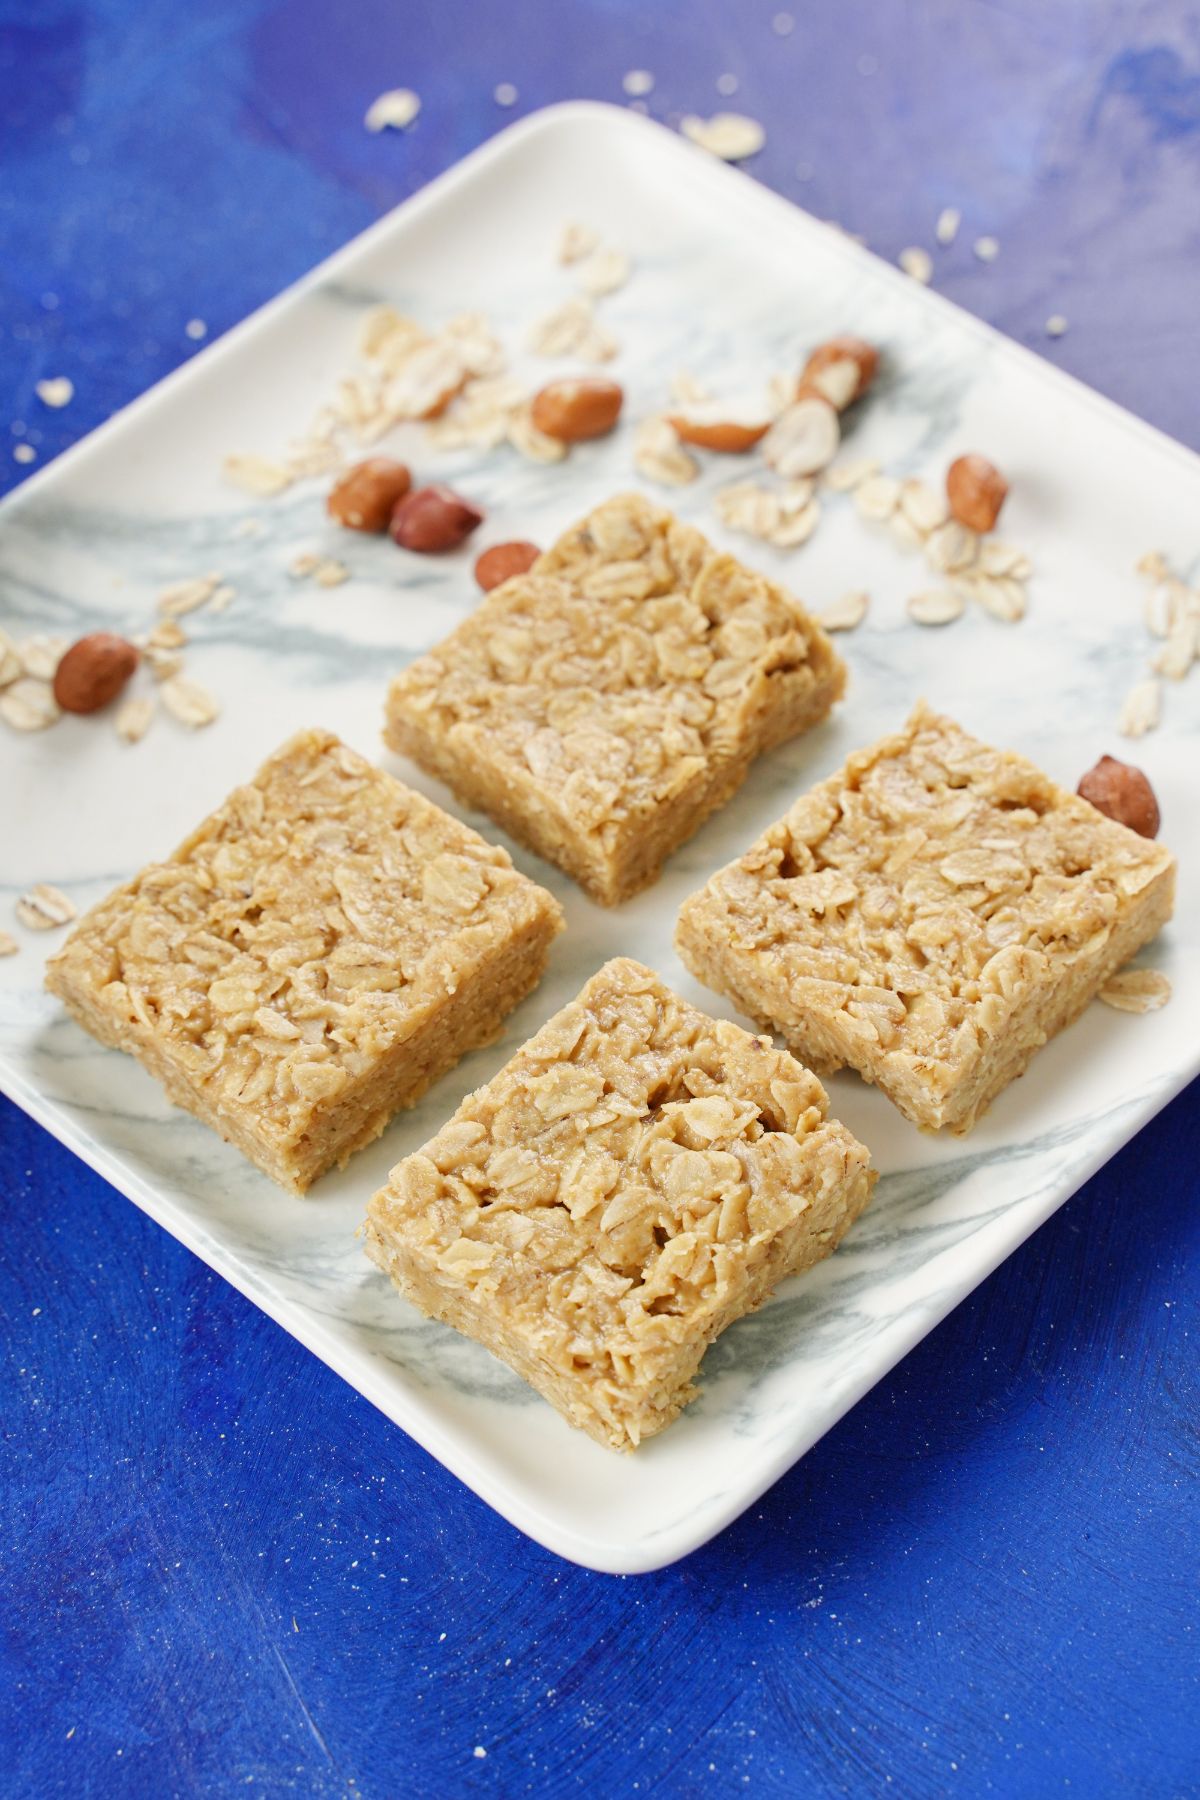 Peanut Butter Oat Bars served in a blue plate